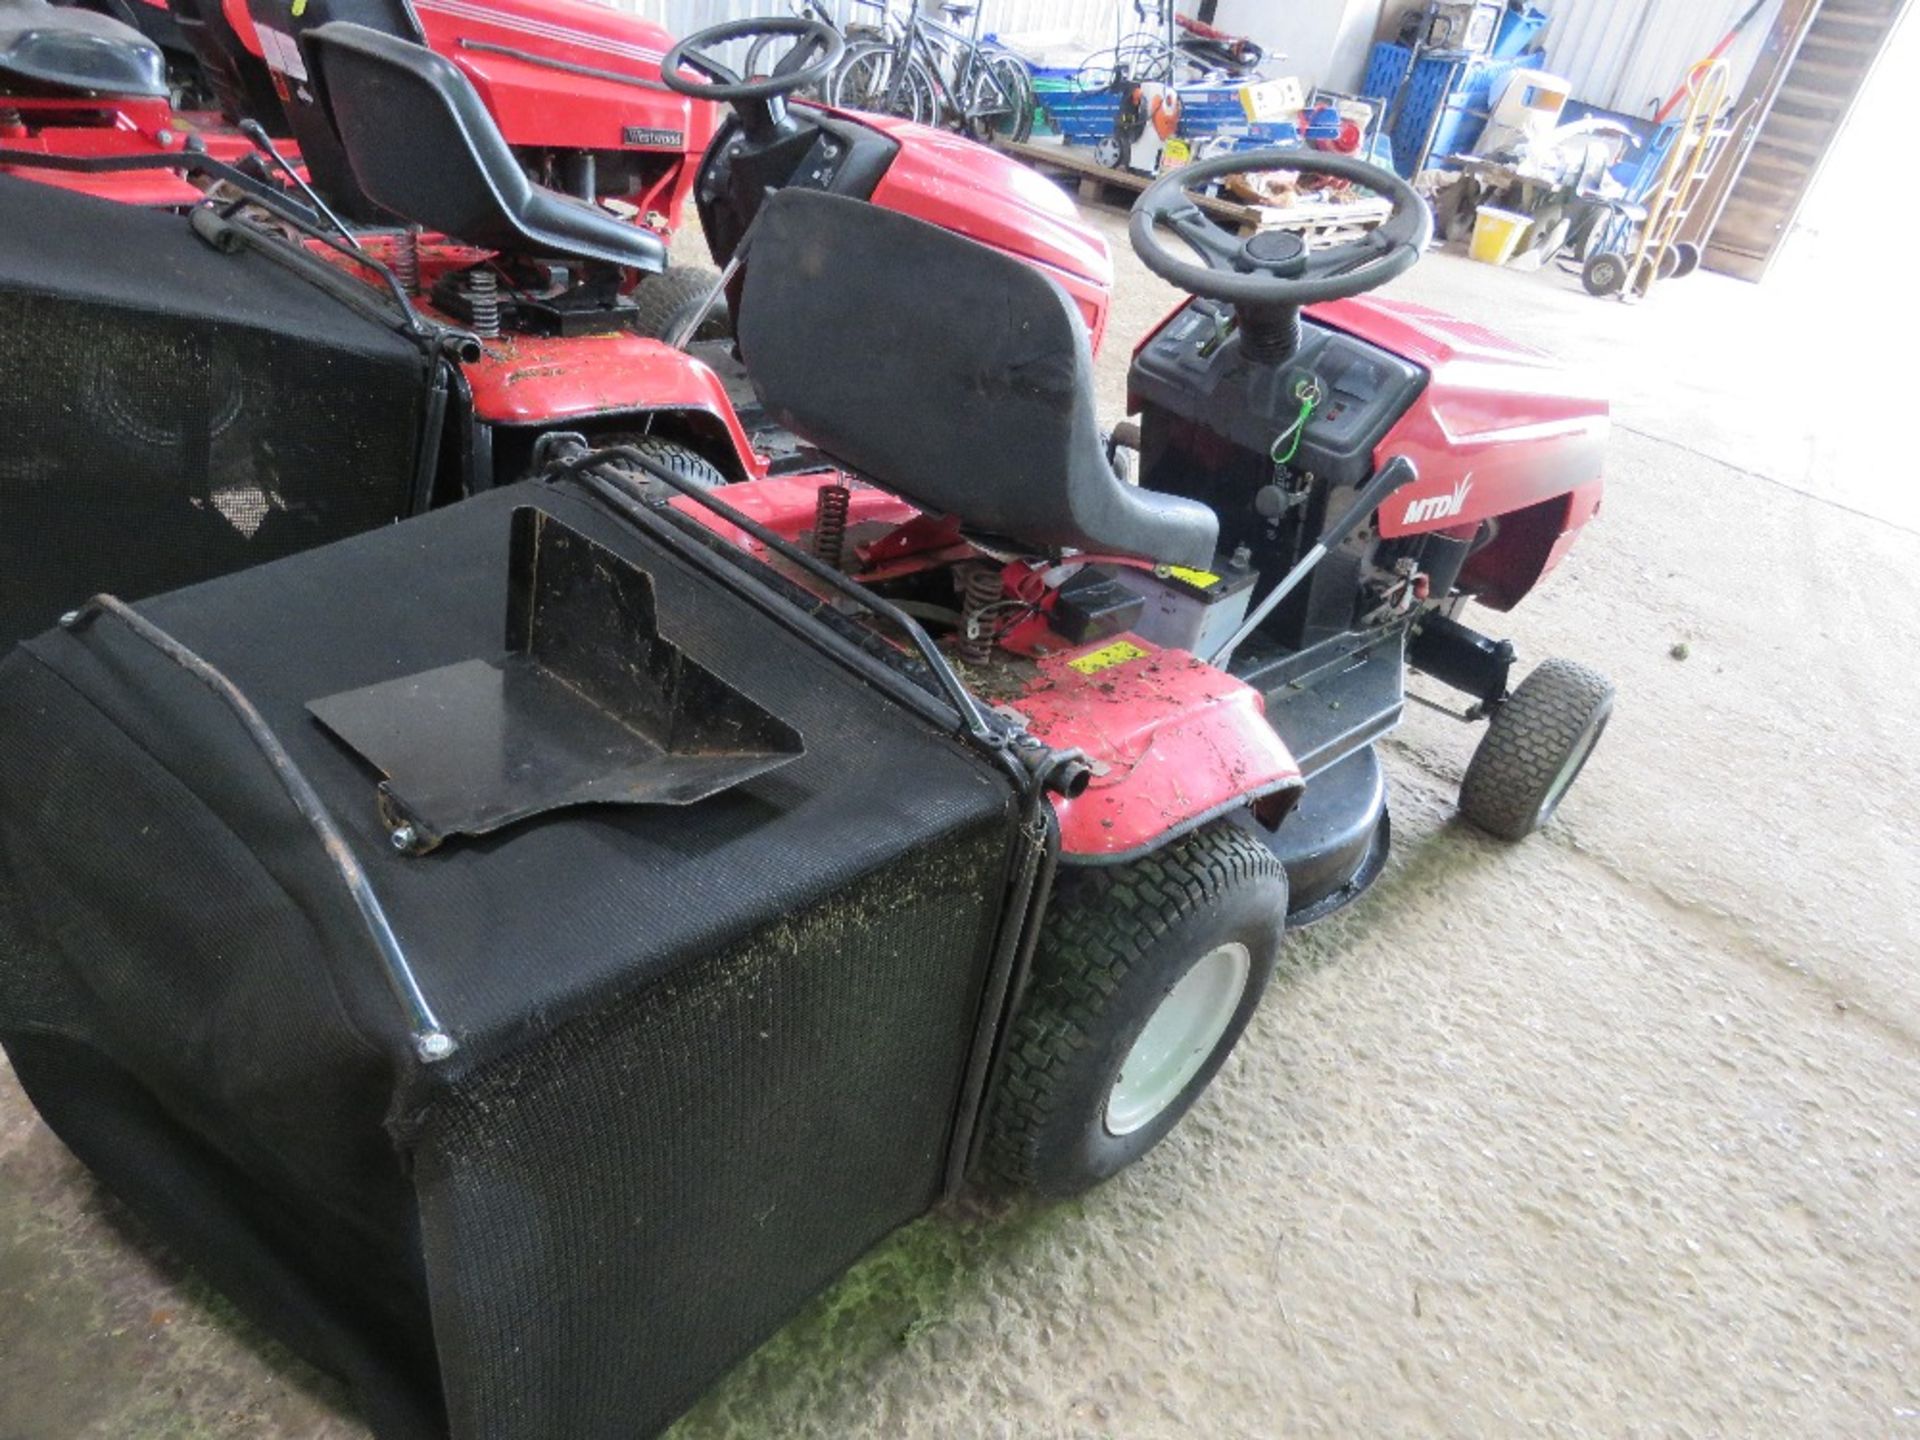 MTD SPIDER 76RD RIDER RIDE ON MOWER WITH COLLECTOR. WHEN BRIEFLY TESTED WAS SEEN TO RUN, DRIVE AND M - Image 4 of 10